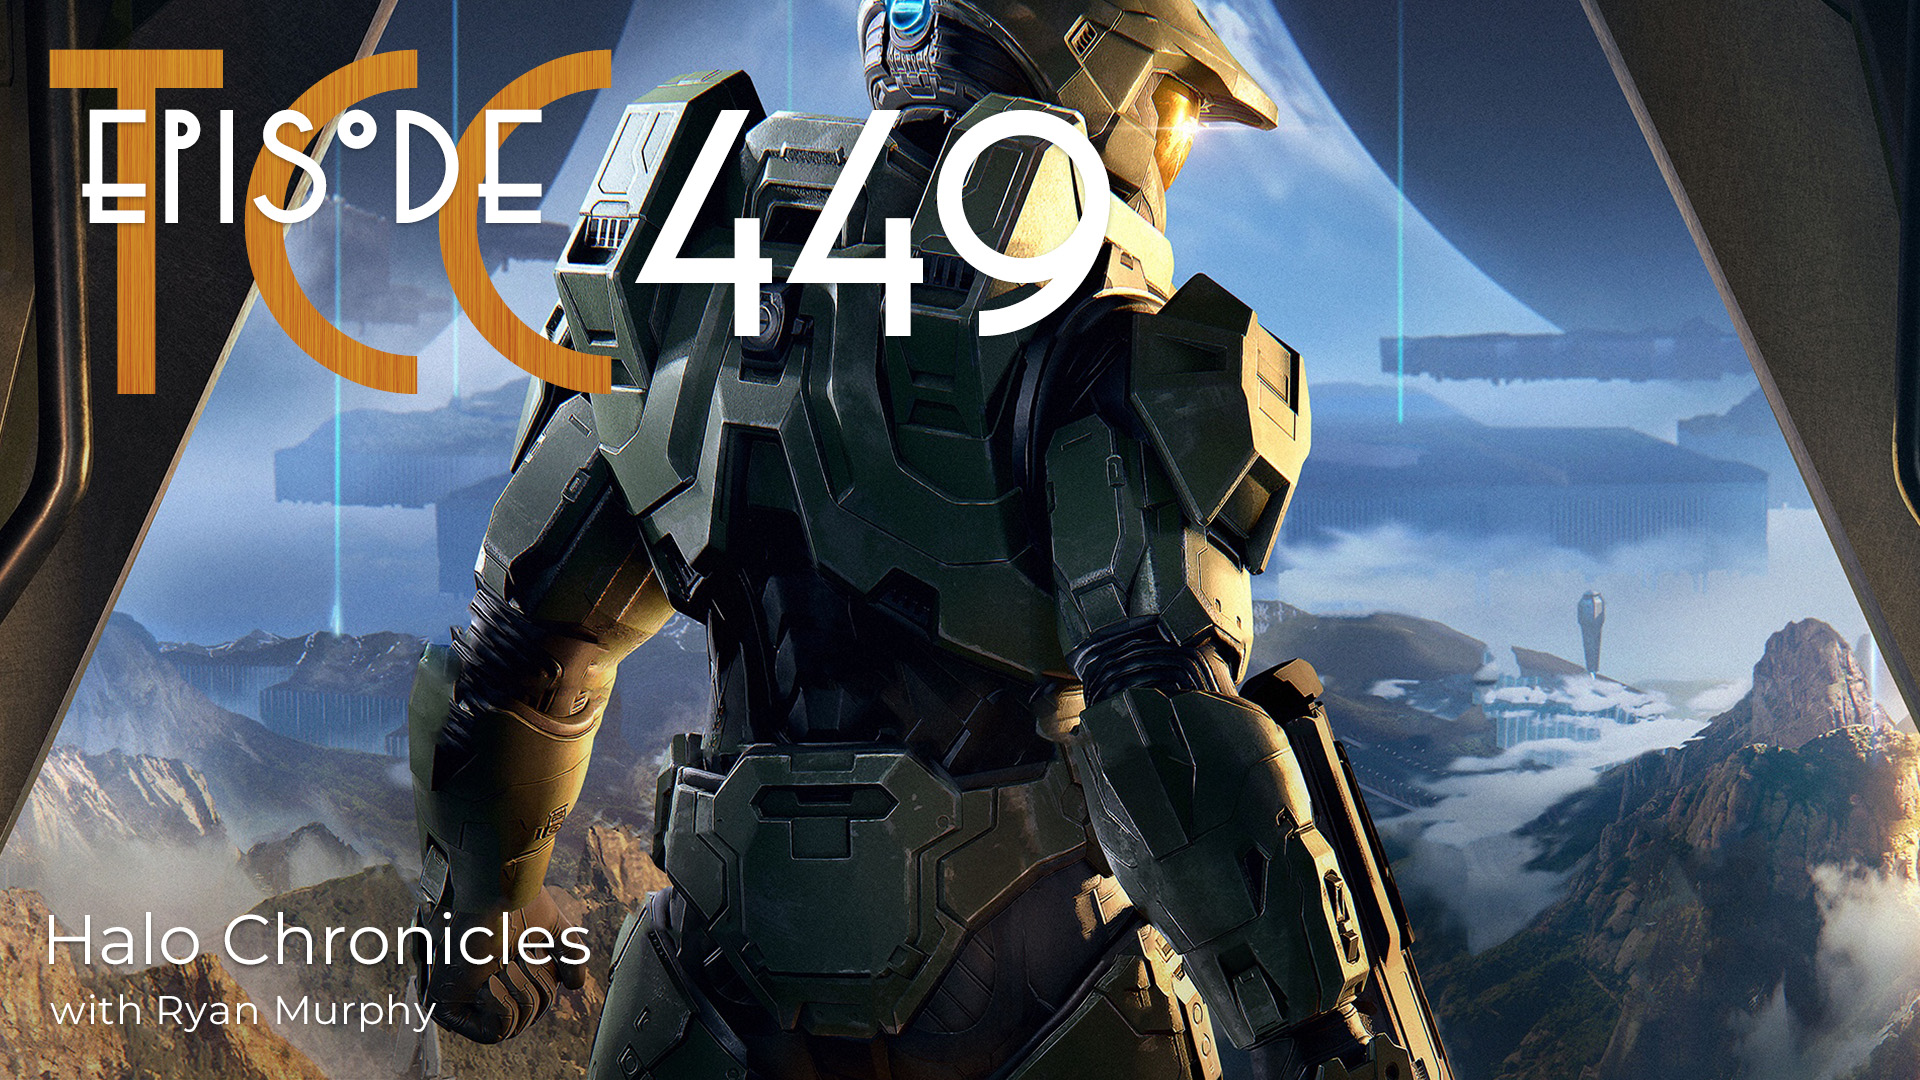 The Citadel Cafe 449: Halo Chronicles